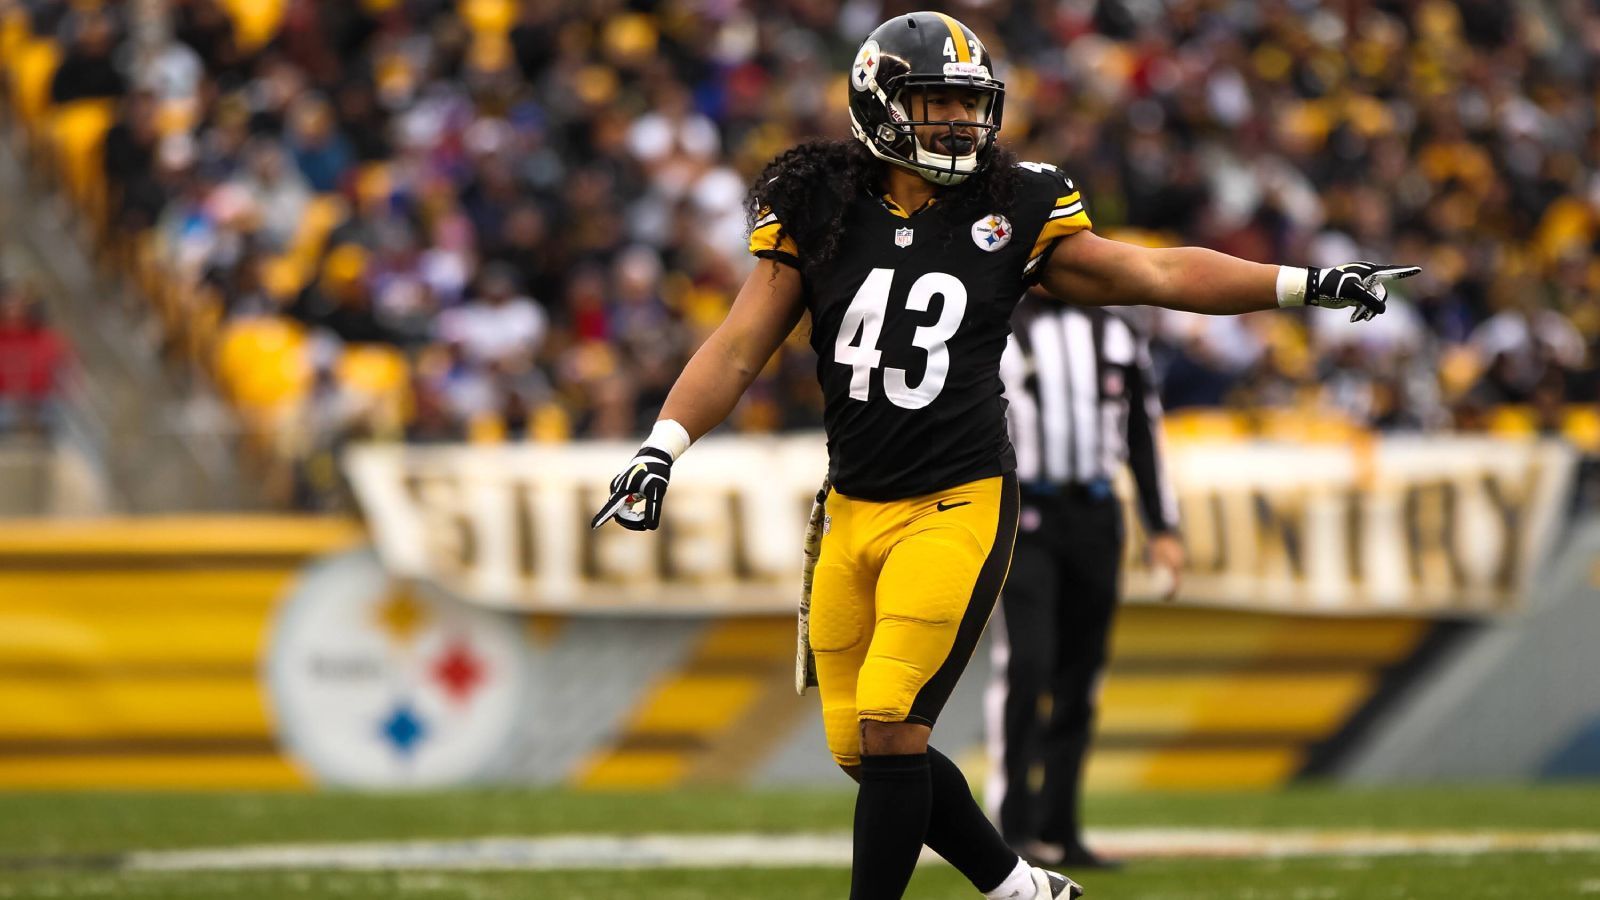 
                <strong>2020: Troy Polamalu</strong><br>
                &#x2022; Position: Defensive Back -<br>&#x2022; In der NFL: 2003 bis 2014 -<br>&#x2022; Team: Pittsburgh Steelers<br>
              